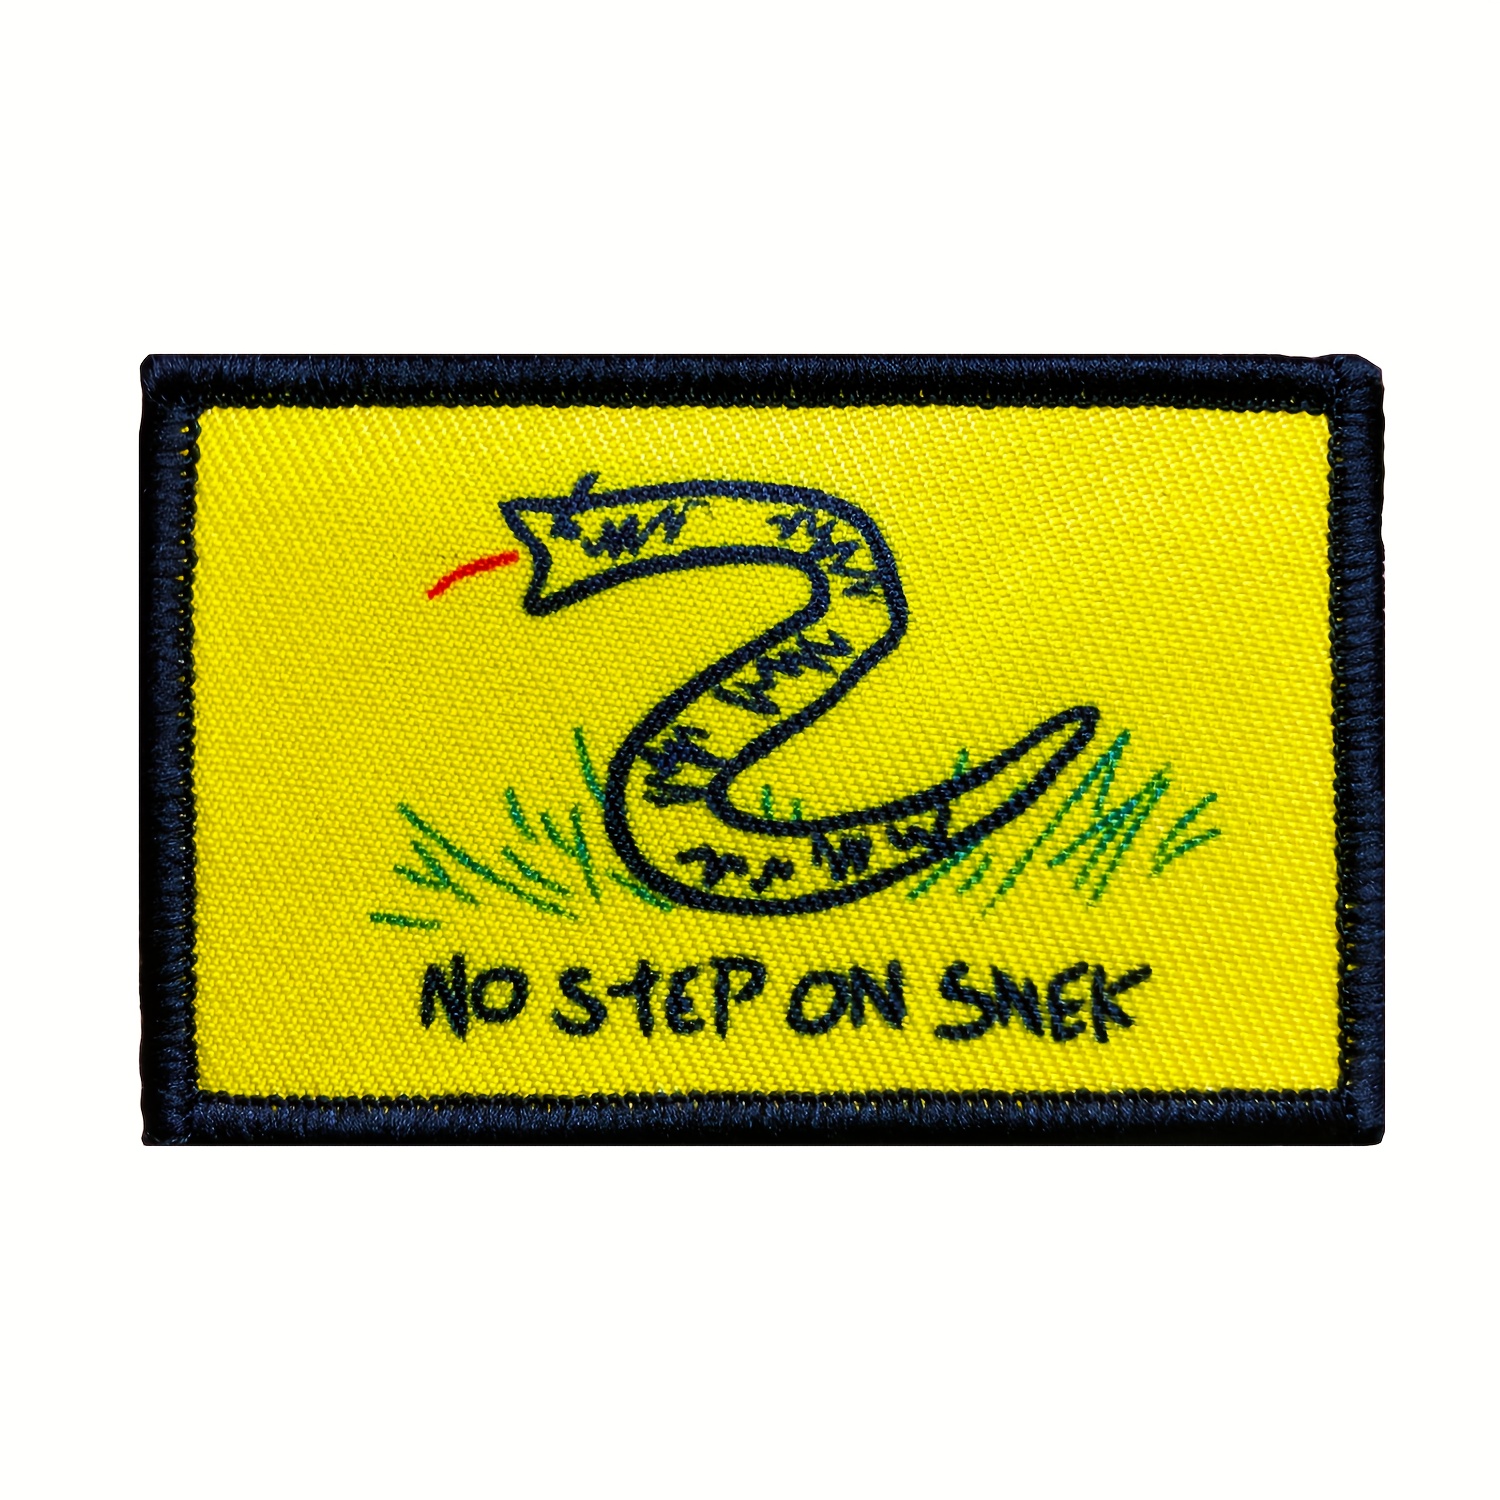  No Step On Snek, Morale Patch Funny Tactical Morale Badge Hook  Loop Tactical Patch (Green-1) : Sports & Outdoors